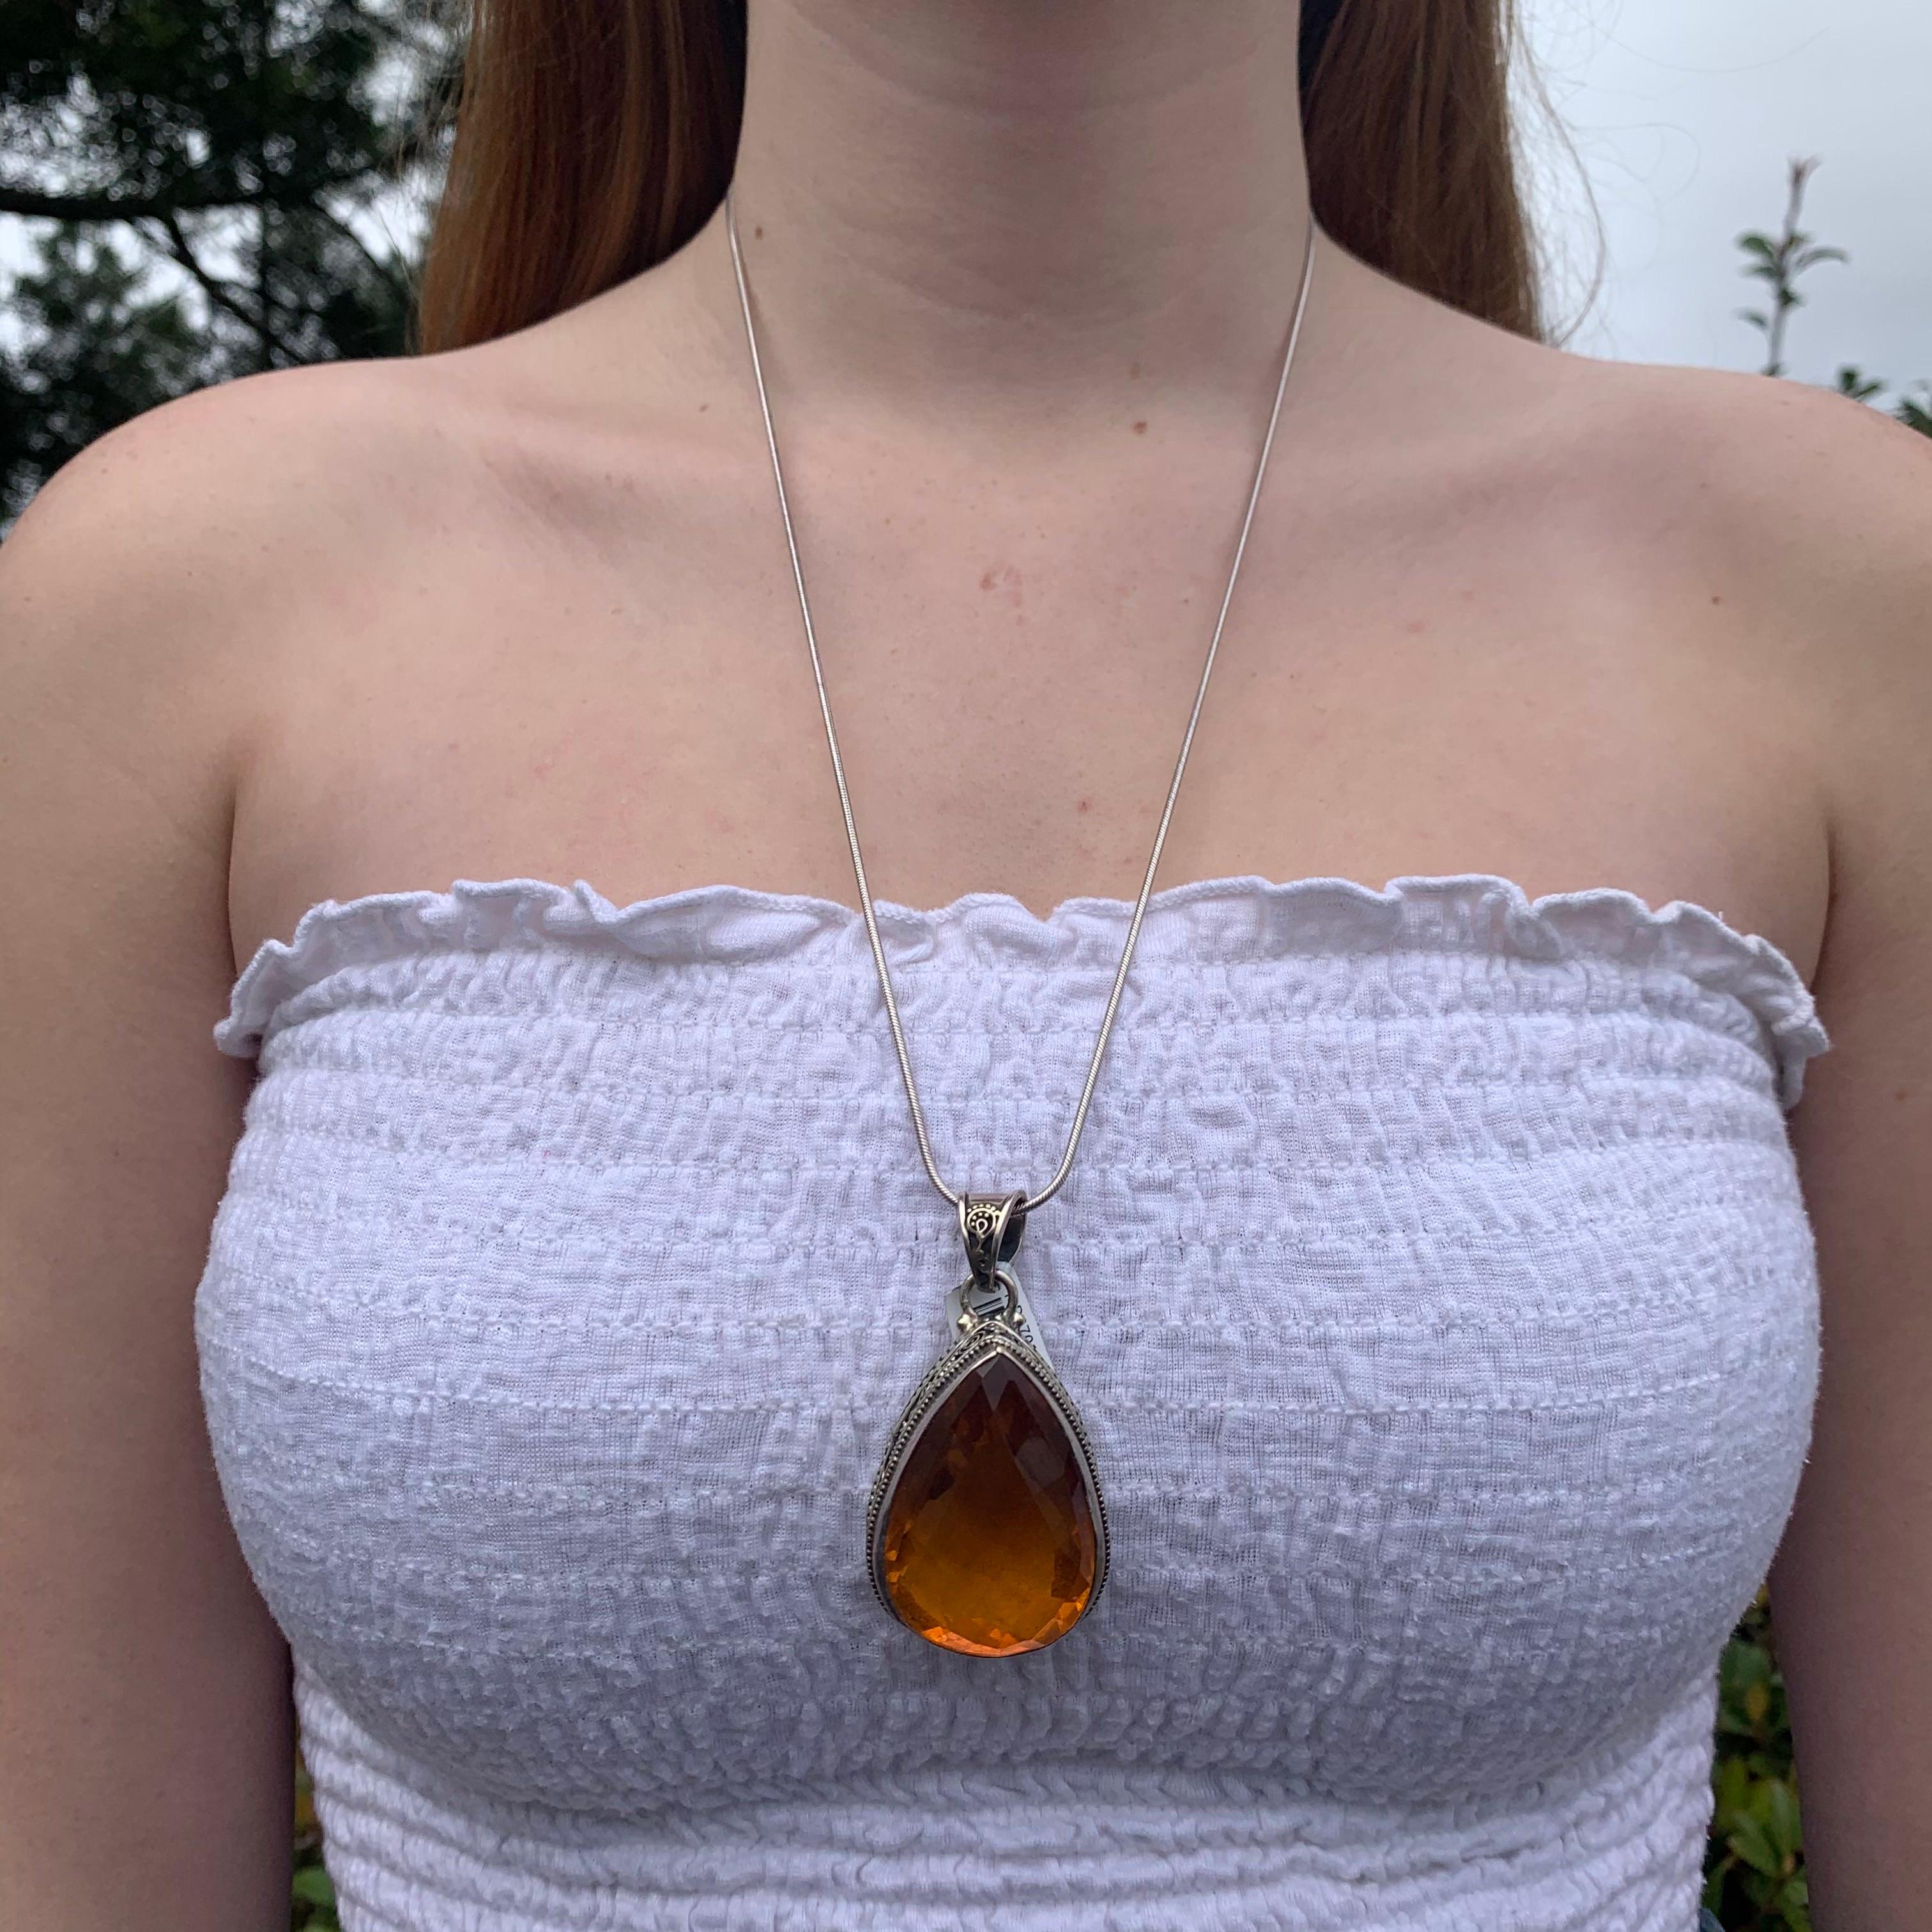 125 Carat Citrine & Sterling Silver Pendant Hand Made in Bali In New Condition For Sale In Carlsbad, CA